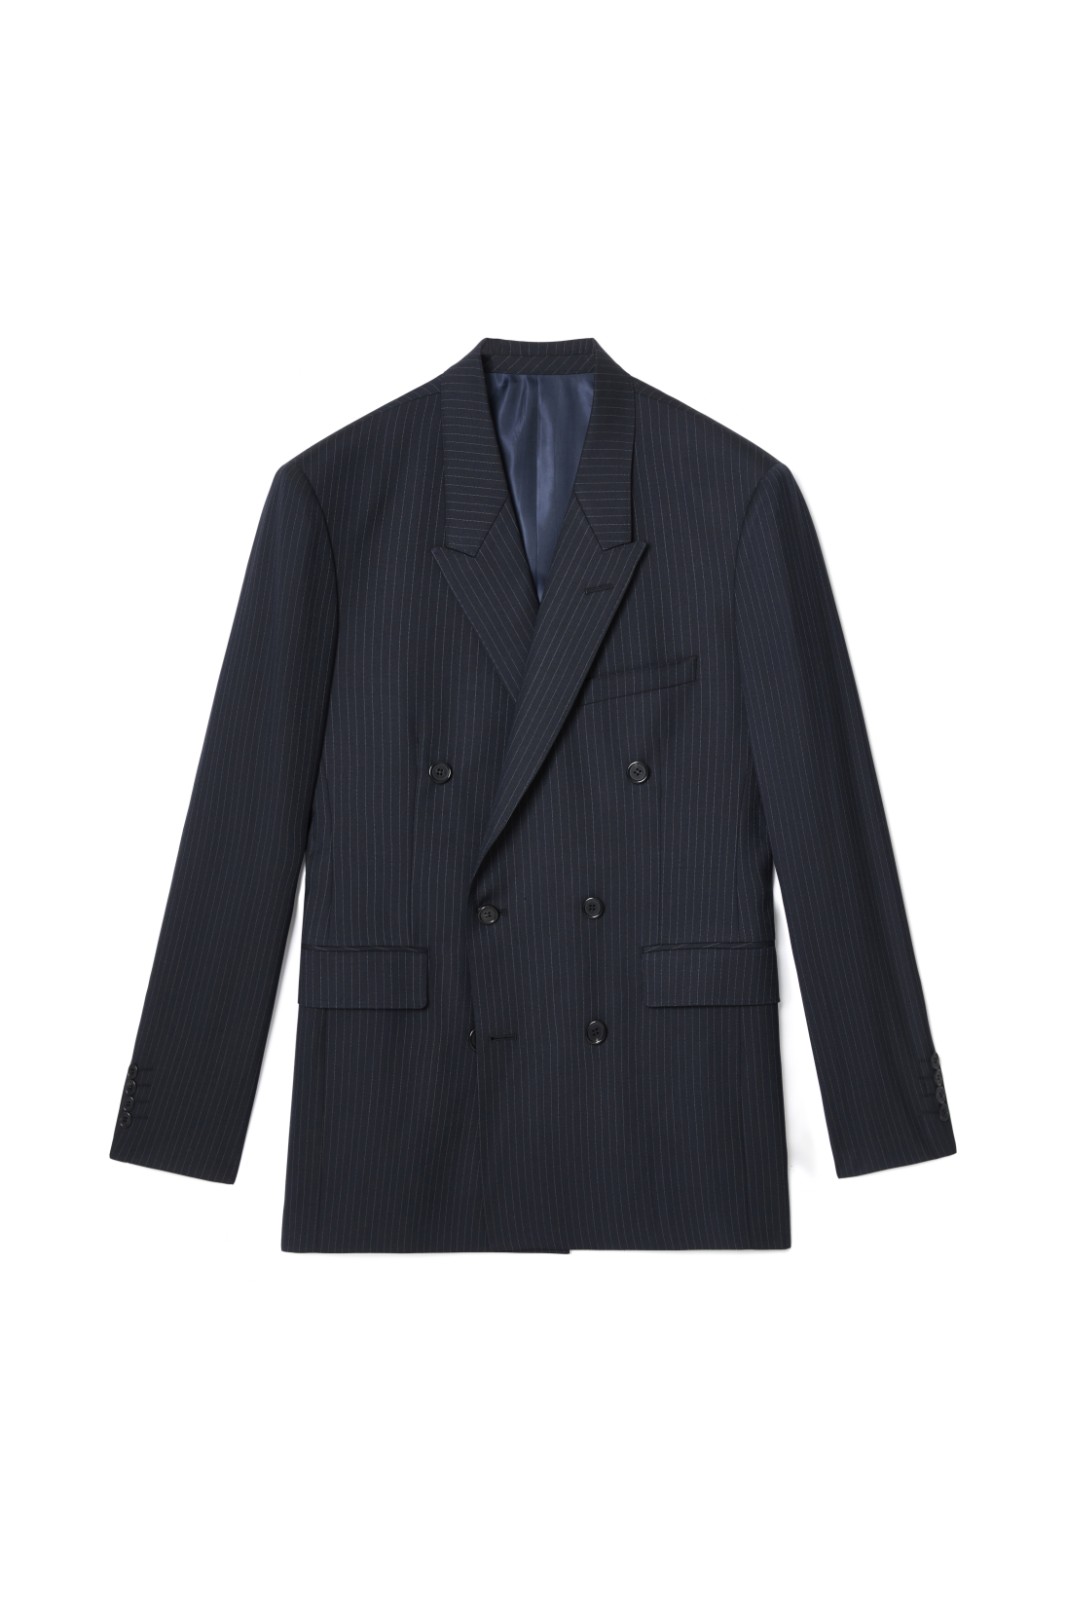 CIRCUSFALSE: DOUBLE BREASTED JACKET IN NAVY PINSTRIPE